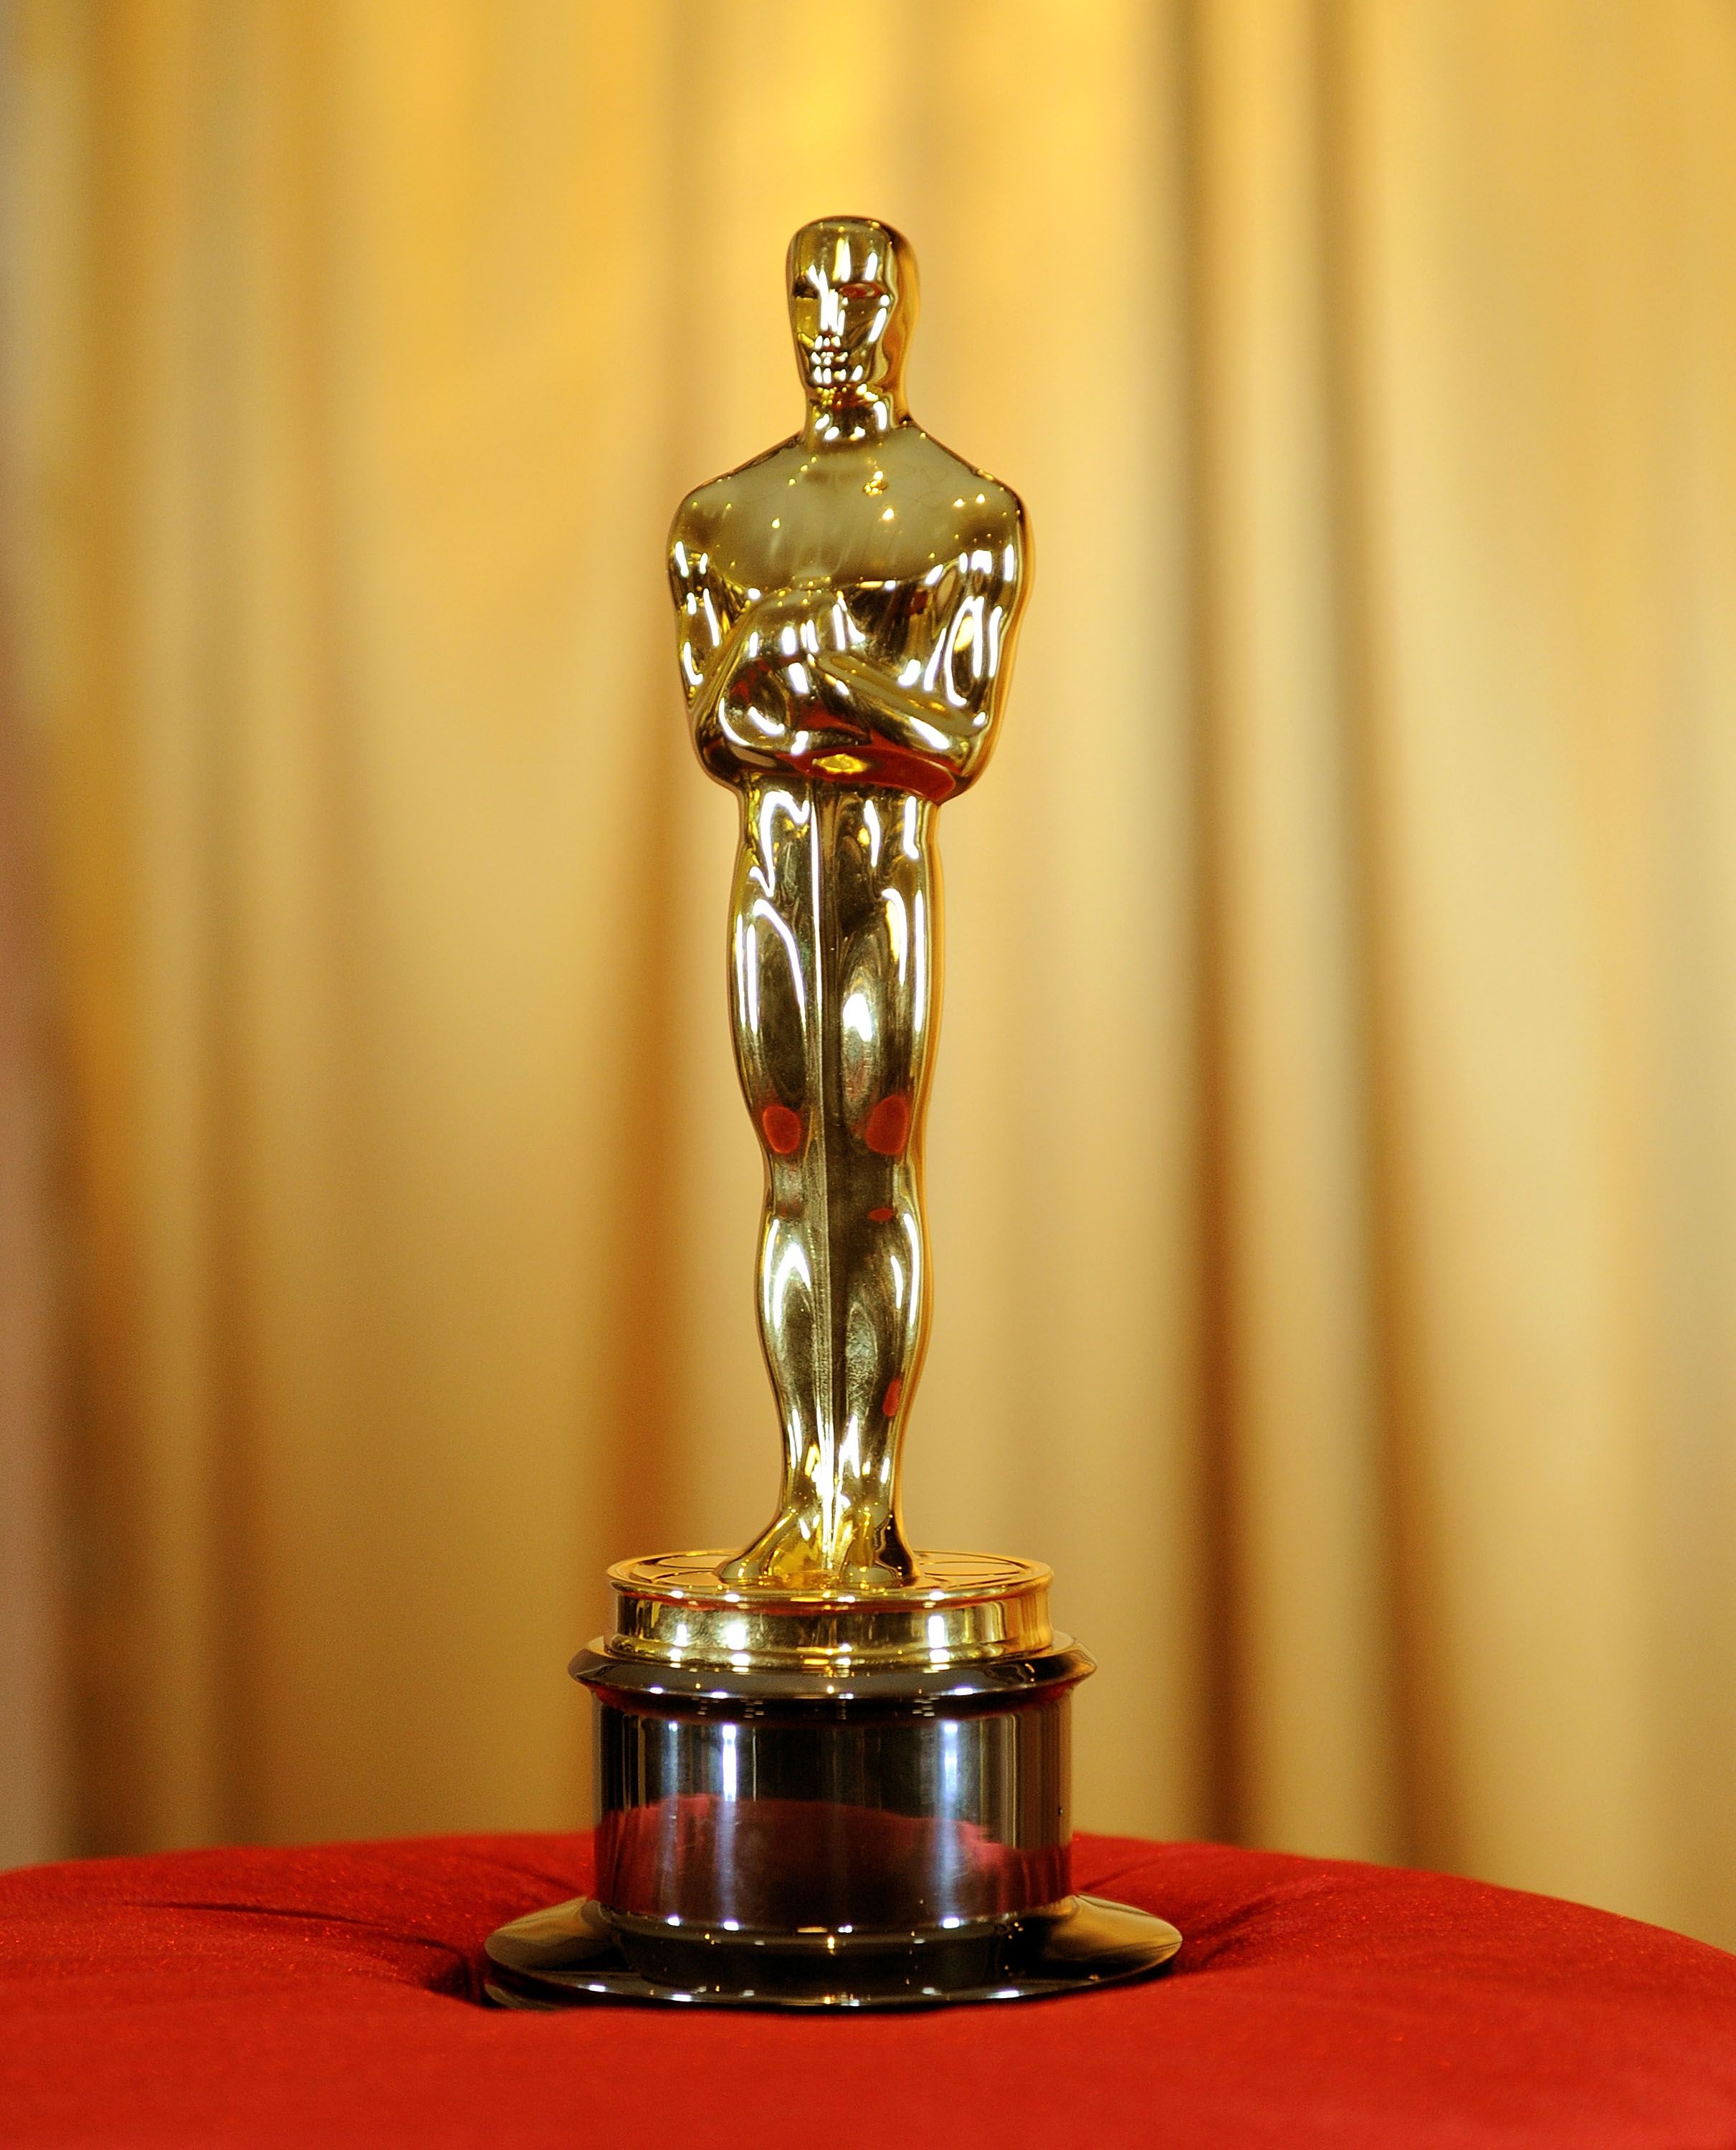 overview-of-the-oscar-statue-at-meet-the-oscars-at-the-time-news-photo-1588178852 About Academy Awards